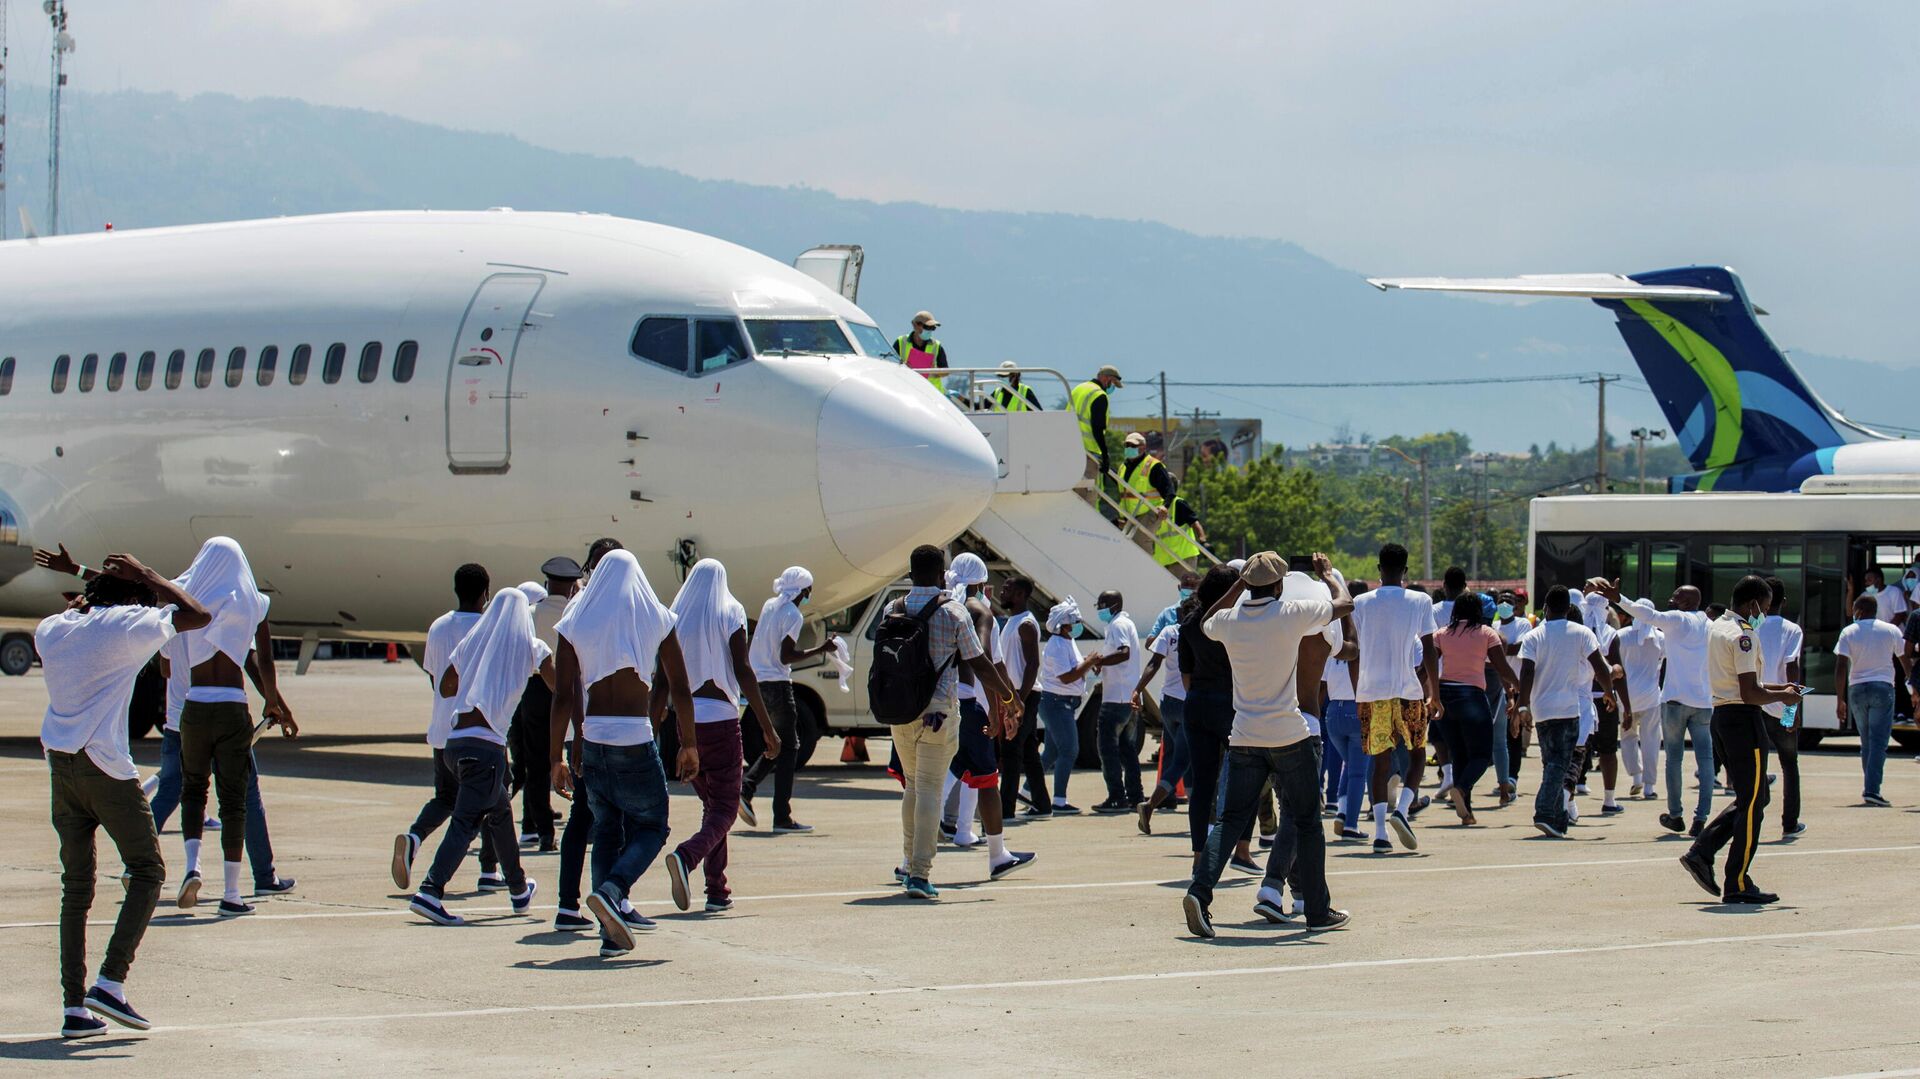 Haitian migrants board an airport bus aftter U.S. authorities flew them out of a Texas border city after crossing the Rio Grande river from Mexico, at Toussaint Louverture International Airport in Port-au-Prince, Haiti September 21, 2021 - Sputnik International, 1920, 07.10.2021